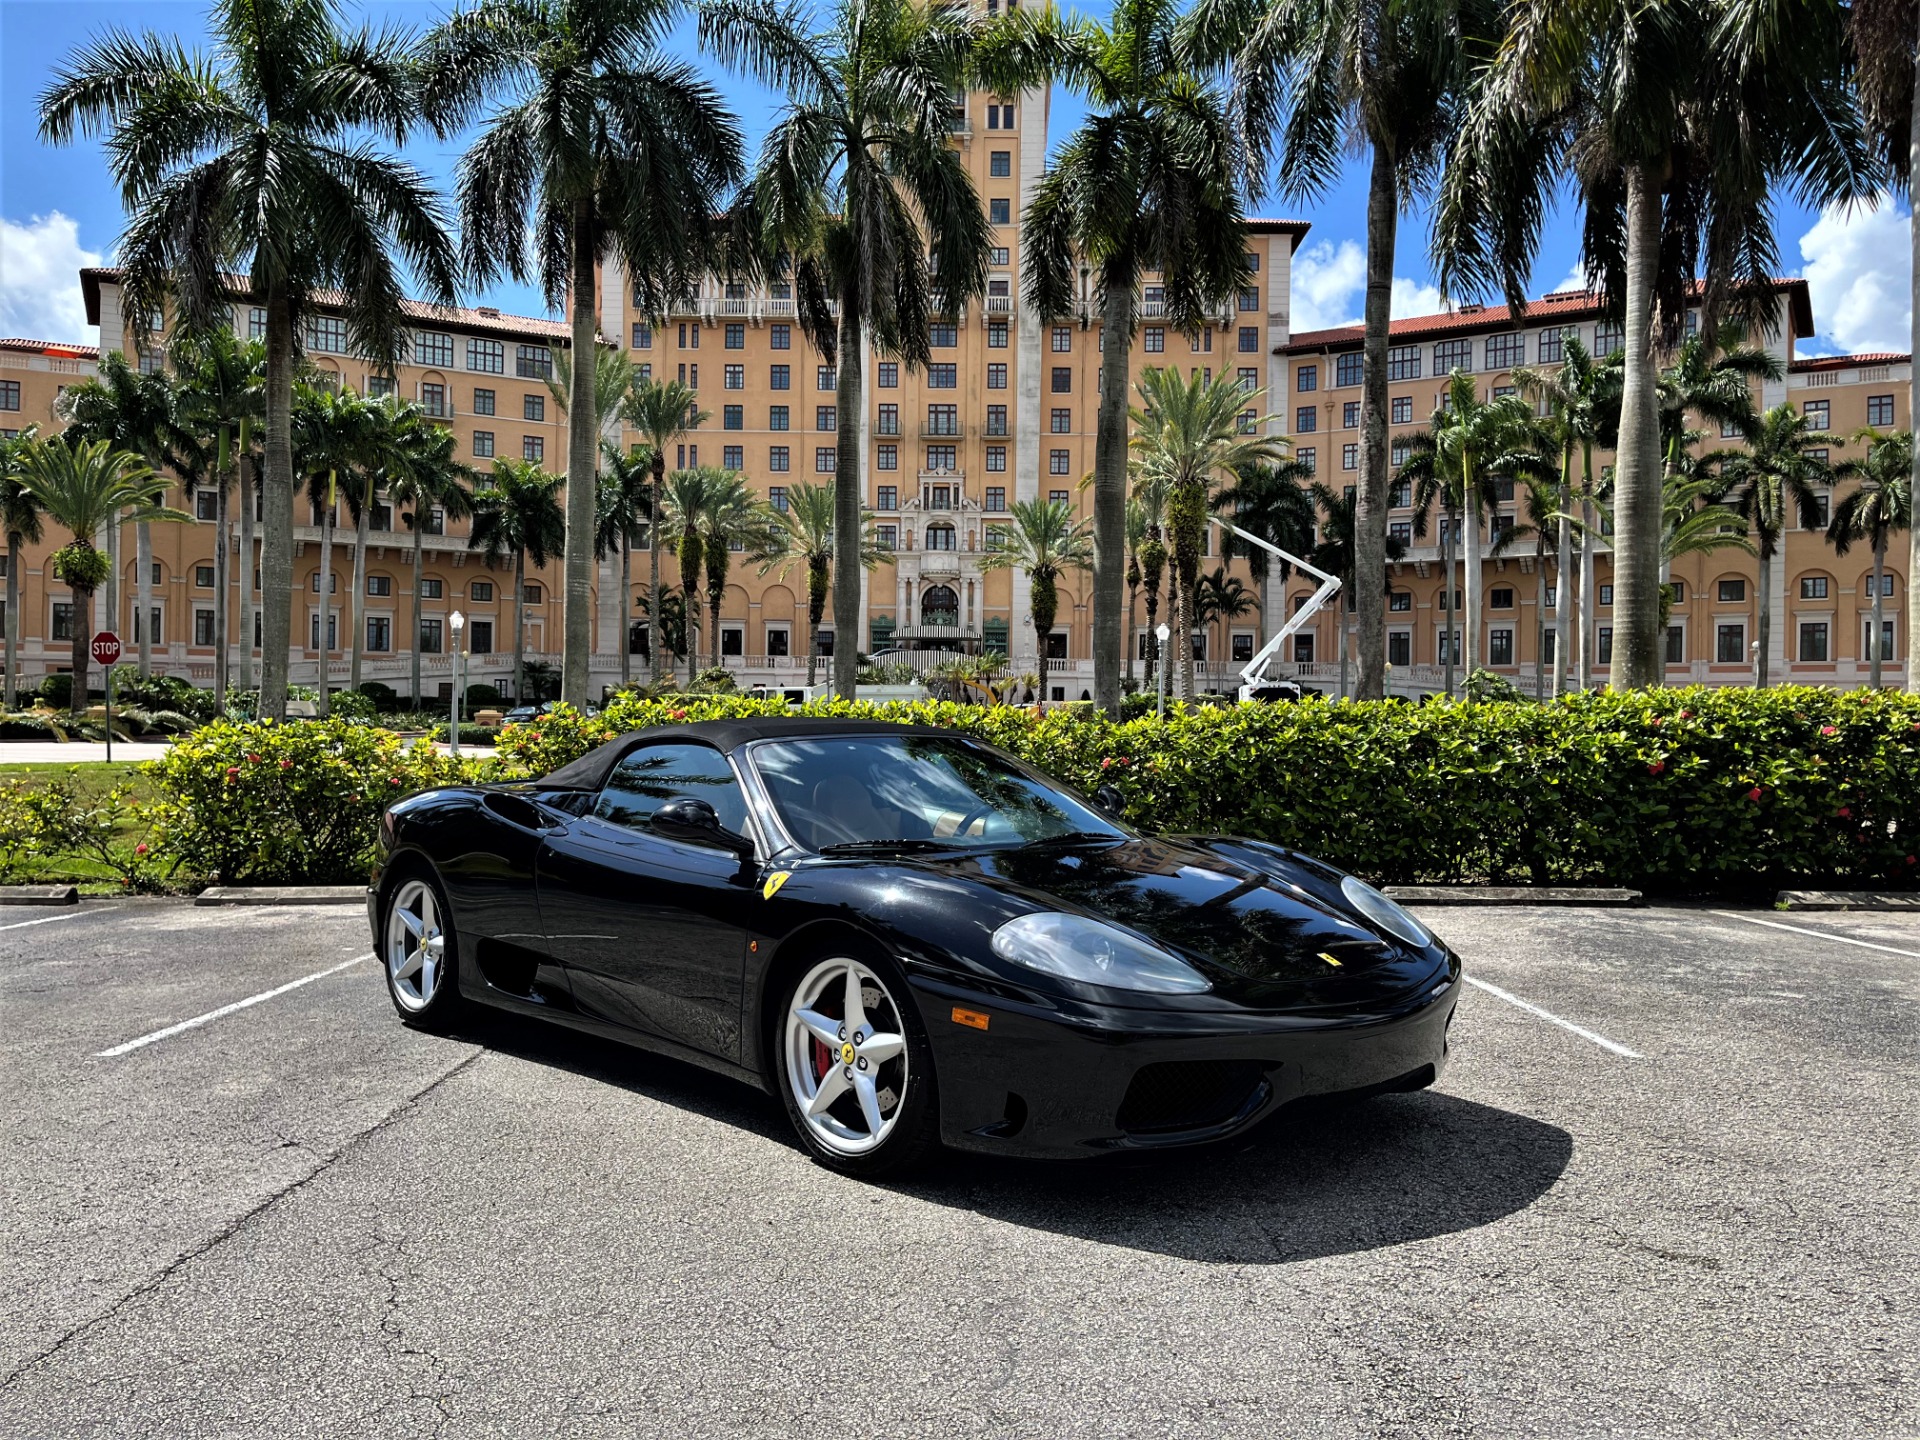 Used 2003 Ferrari 360 Spider for sale $98,850 at The Gables Sports Cars in Miami FL 33146 1